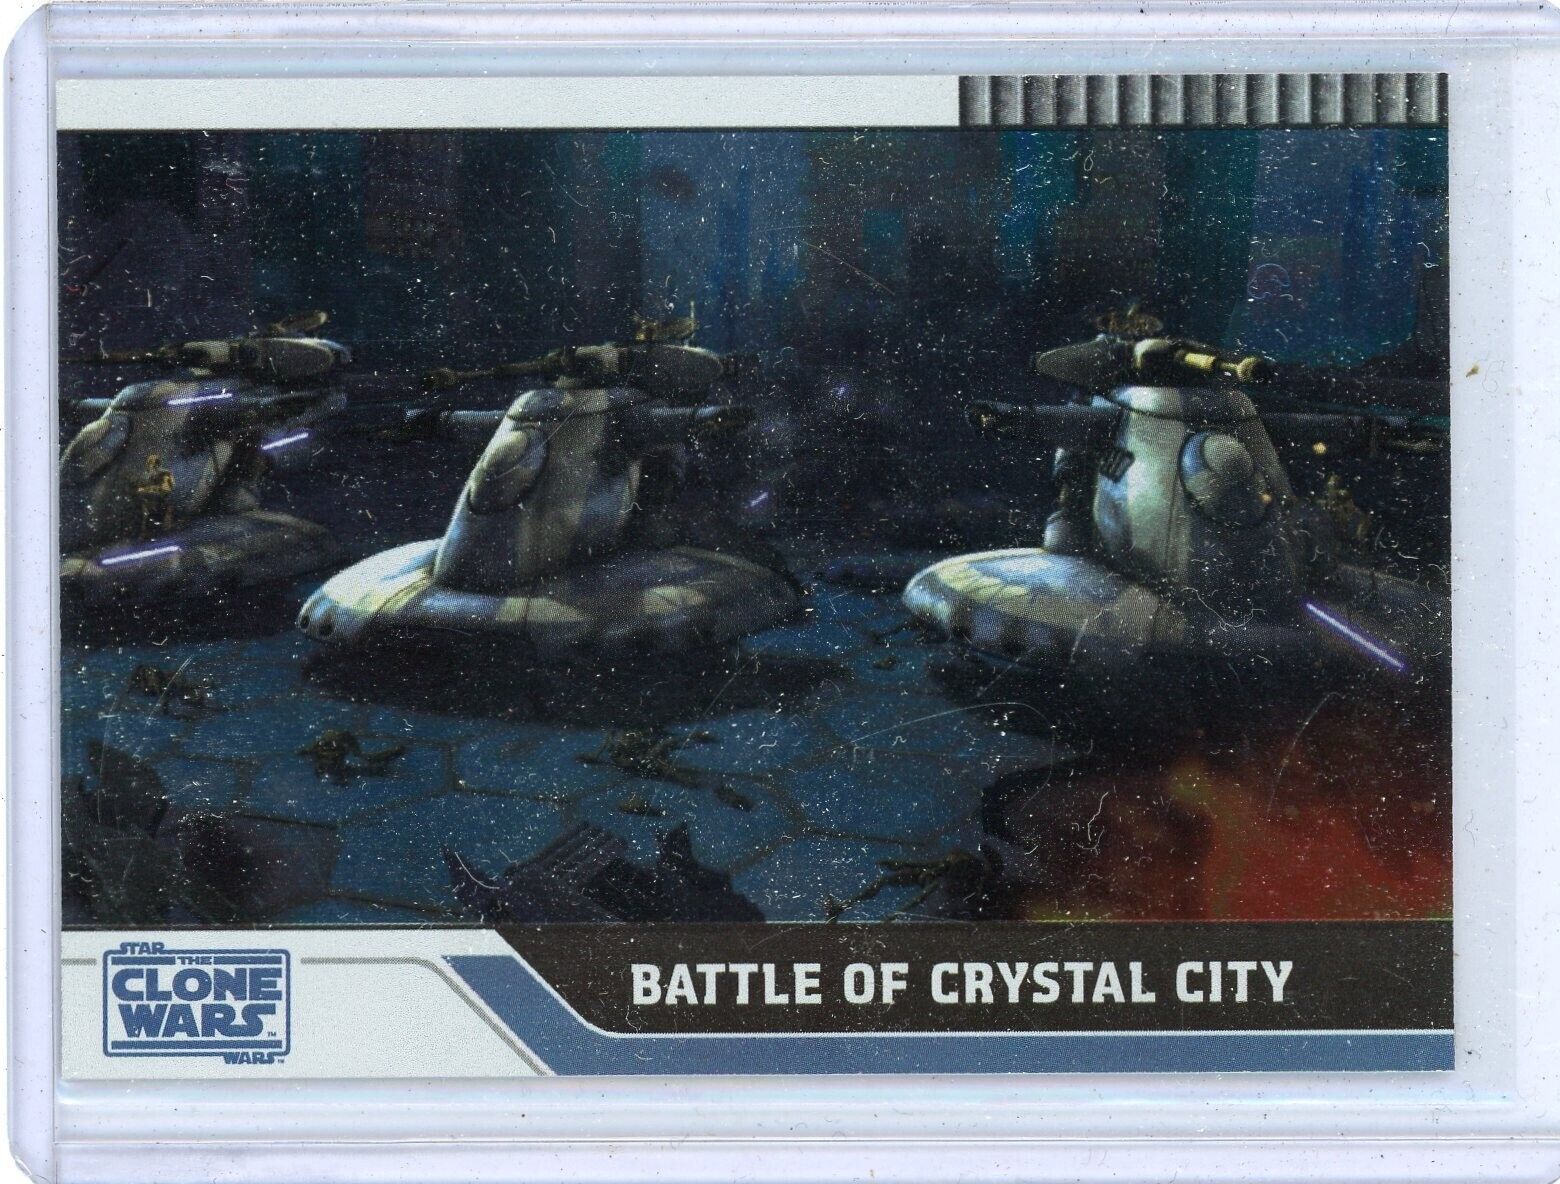 BATTLE of CRYSTAL CITY 2008 TOPPS STAR WARS CLONE WARS #26 FOIL PARALLEL 182/205